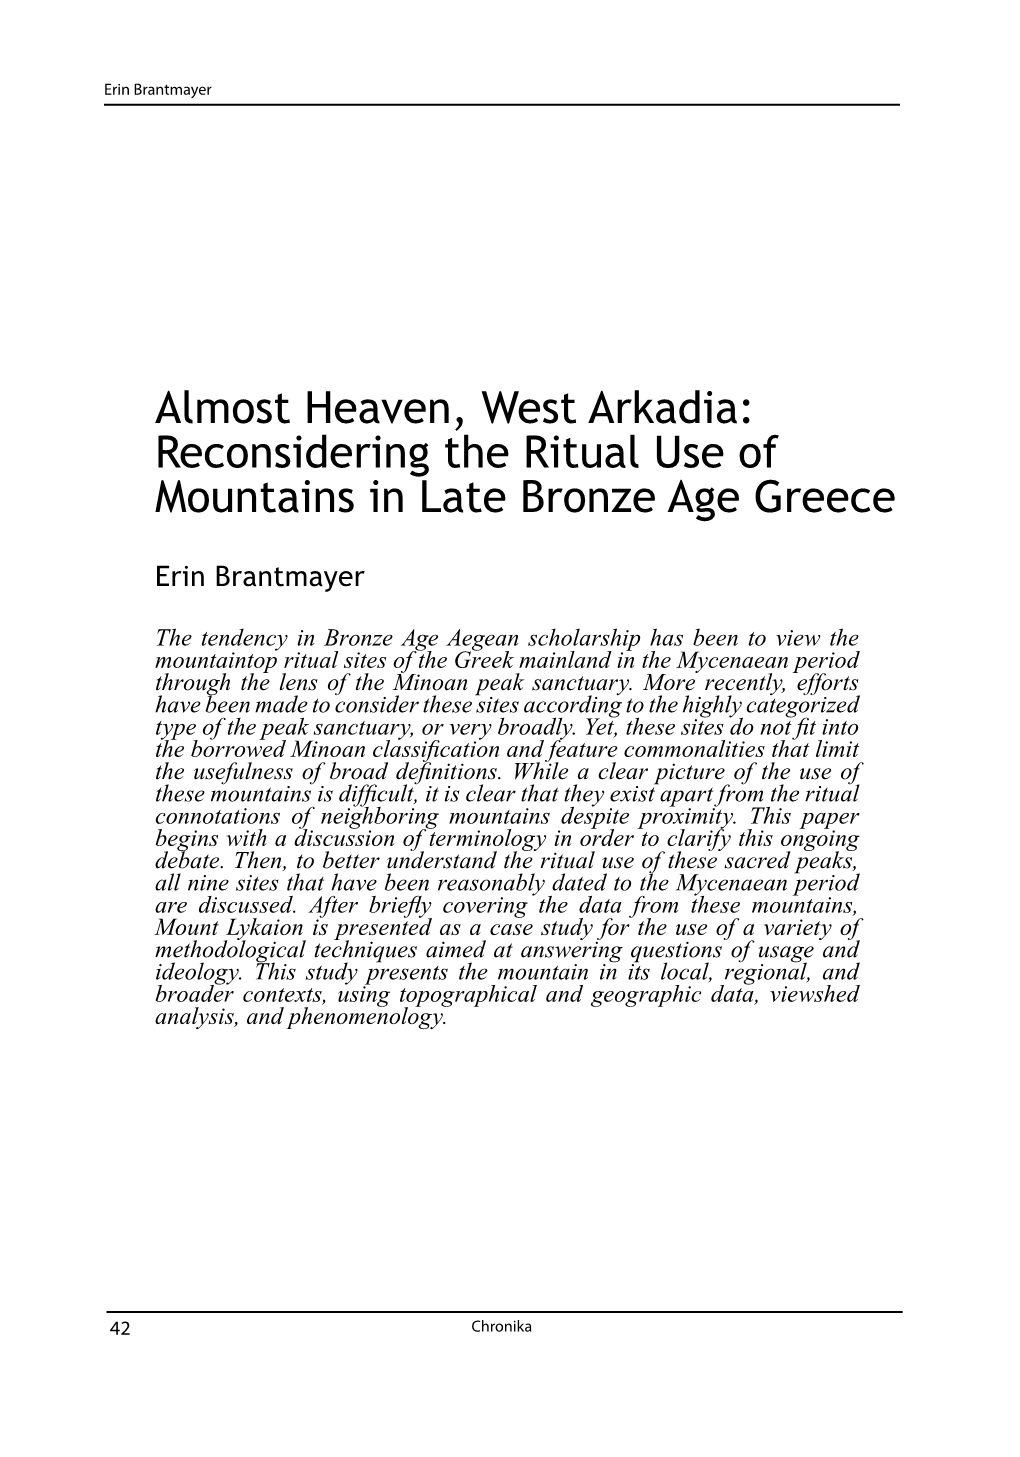 Almost Heaven, West Arkadia: Reconsidering the Ritual Use of Mountains in Late Bronze Age Greece